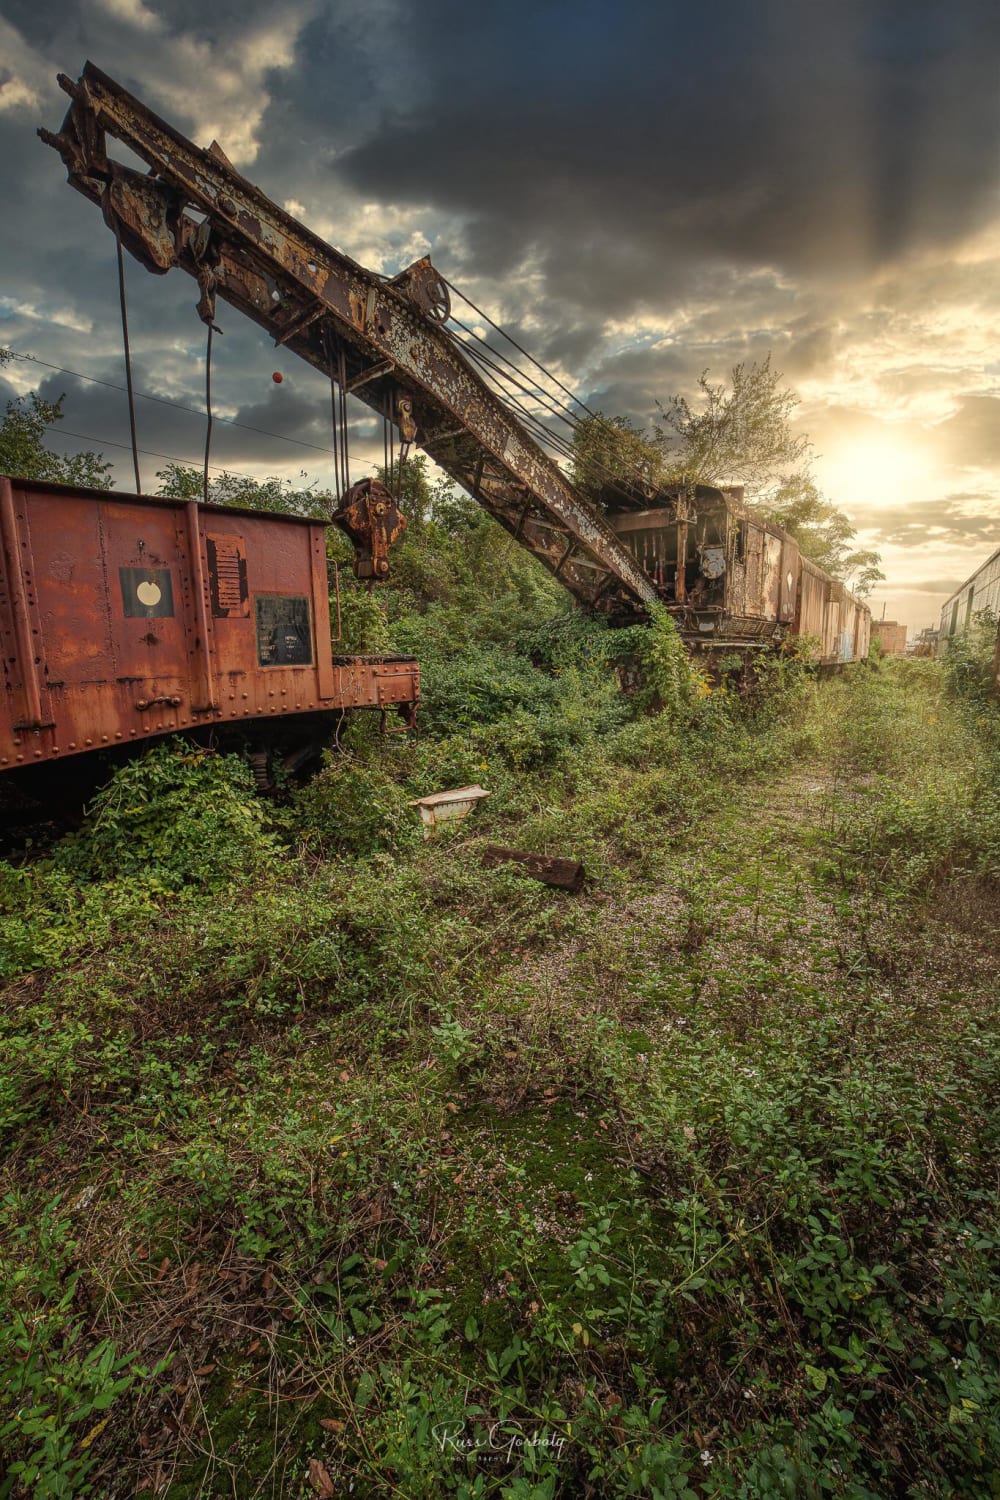 An old rail car reclaimed by nature. For more of my work follow me on instagram @sweeterdo